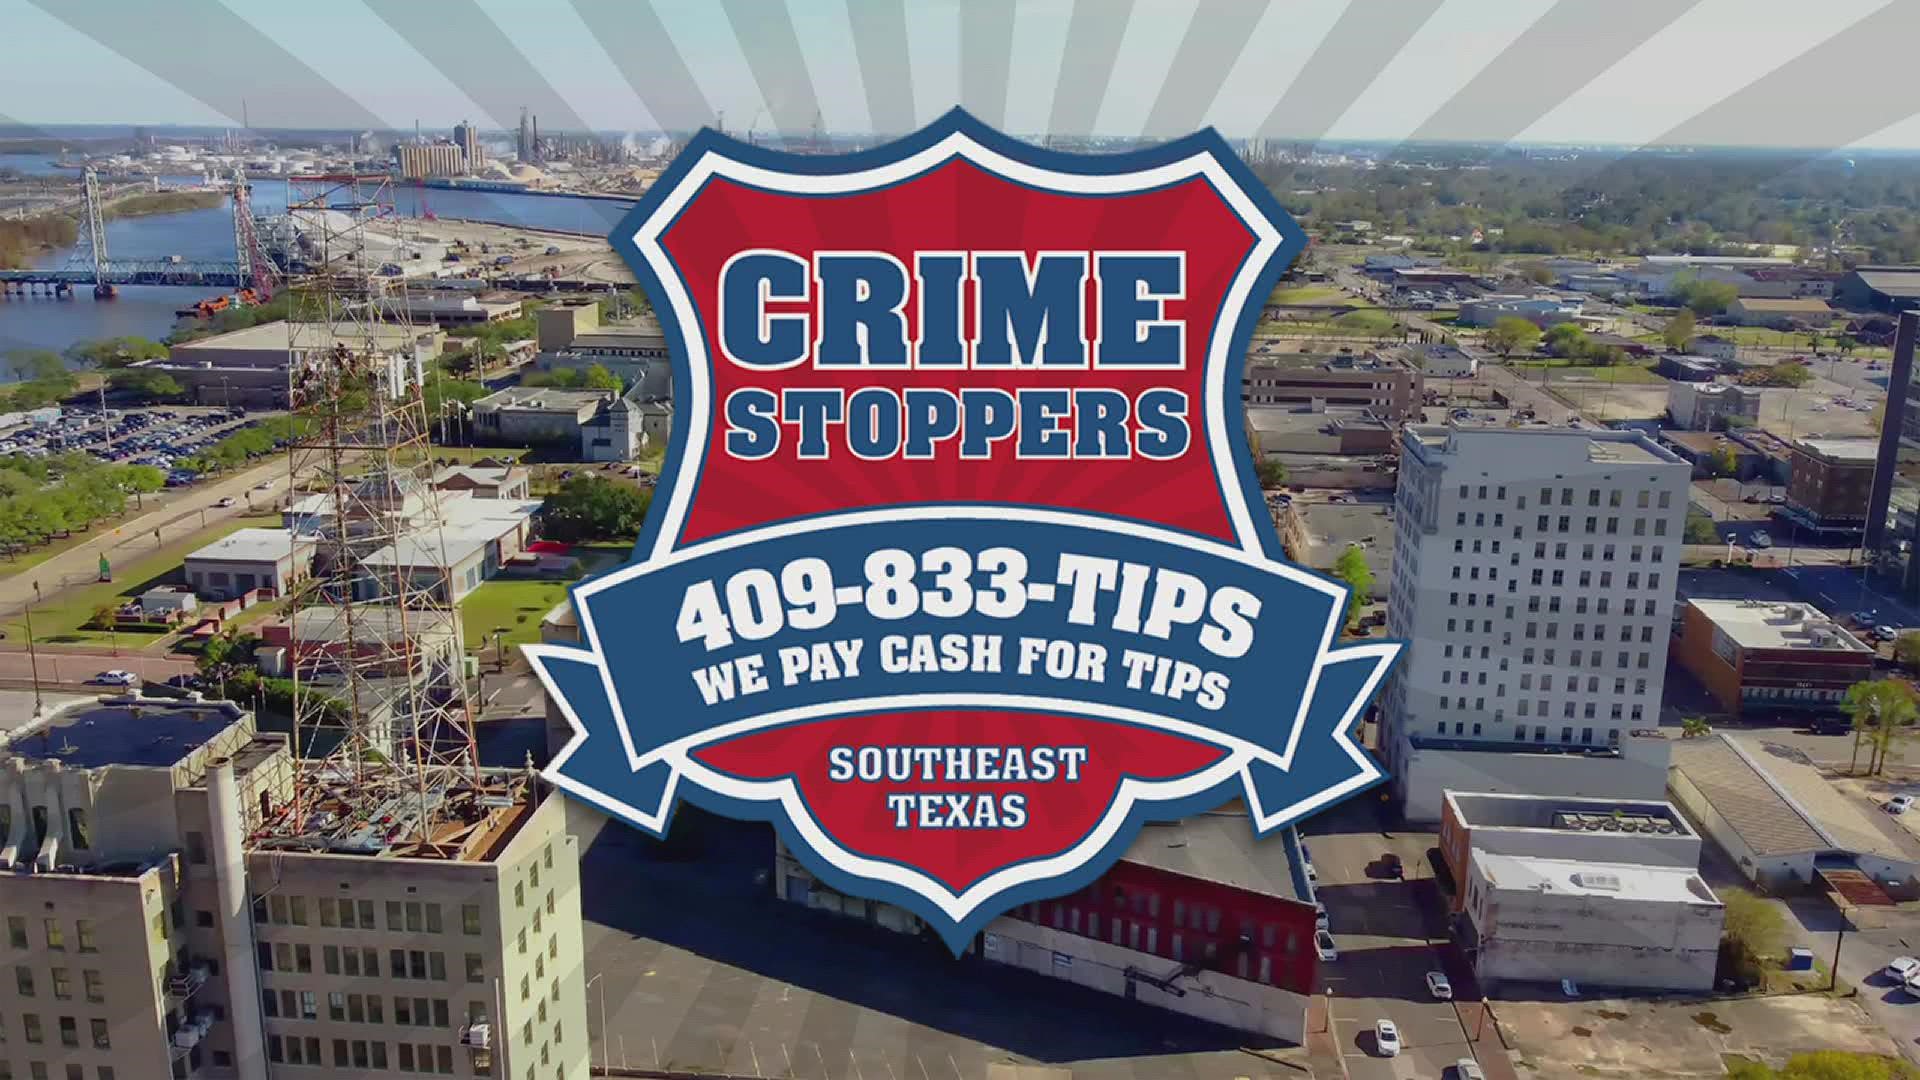 If you have information about a crime you could earn a cash reward of up to $1000 by providing an ANONYMOUS tip to Crime Stoppers of Southeast Texas.